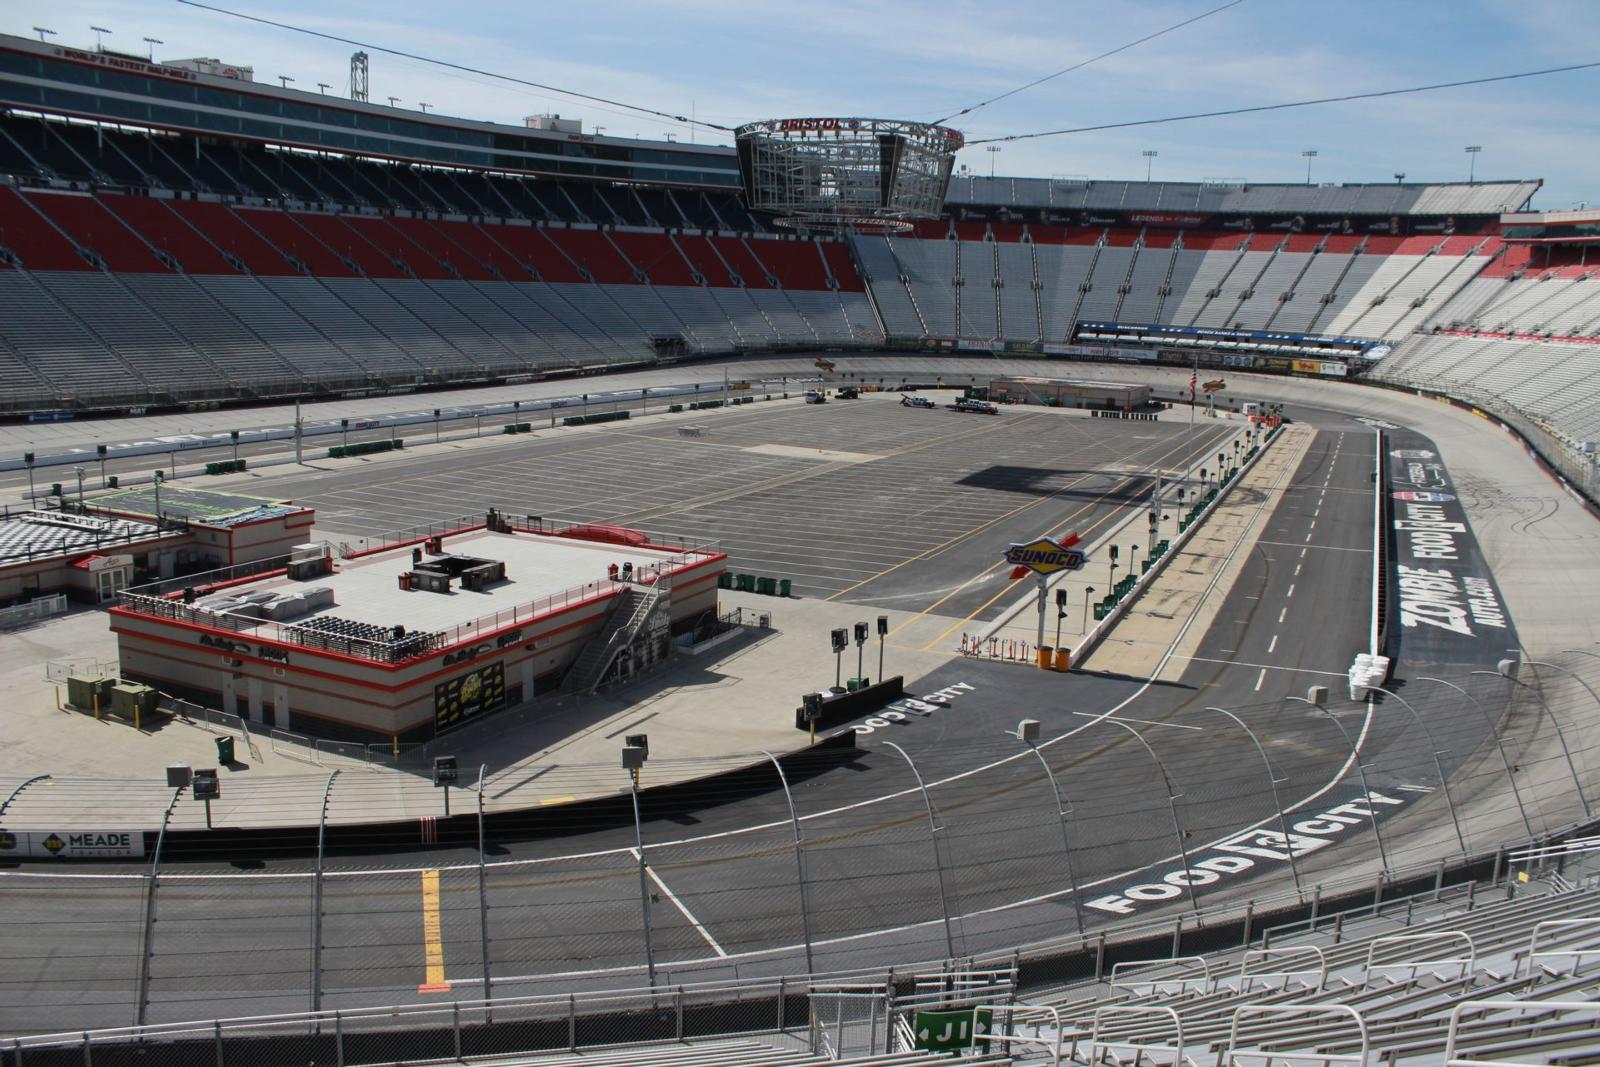 Seating Chart Events Bristol Motor Speedway